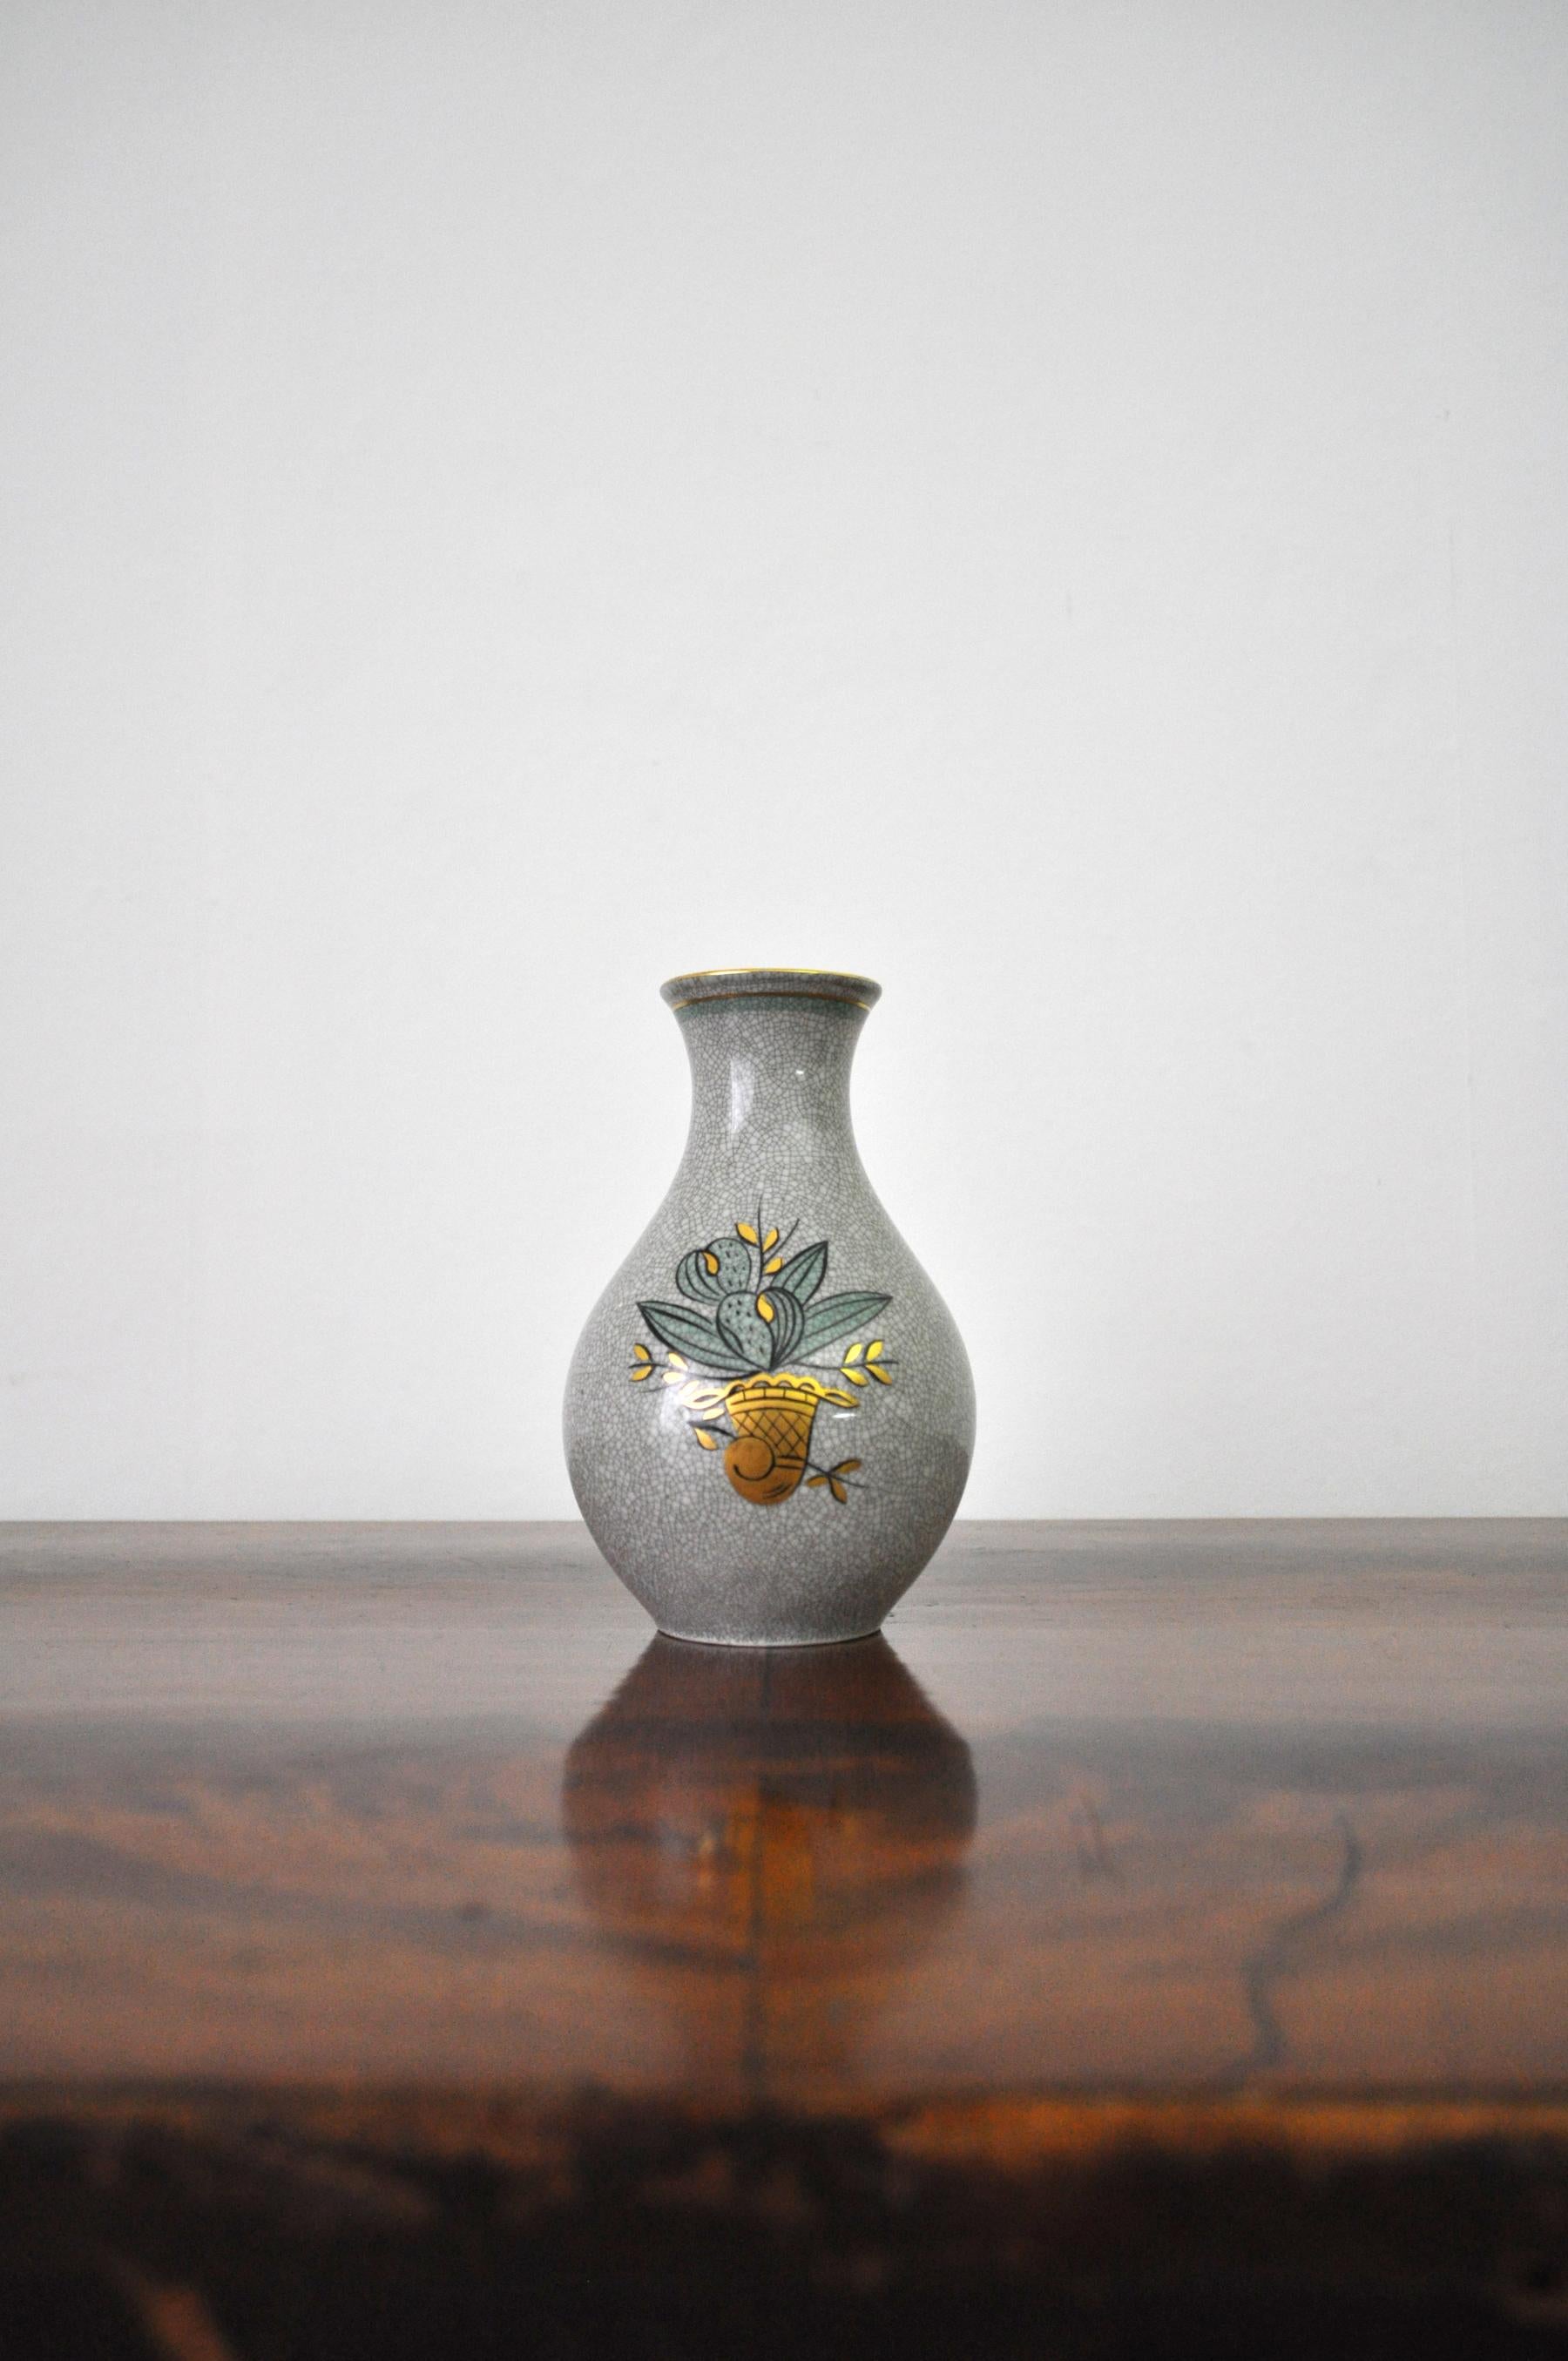 Craquele glaze porcelain vase, gold and green on grey 10.5 x 16 cm Kjøbenhavns Porcellains Maleri (Lyngby Porcelain KPM) 73.2-3628 

Kjøbenhavns Porcellains Maleri (KPM) was founded in 1883 and was acquired by Holst & Knudsen in 1924. The